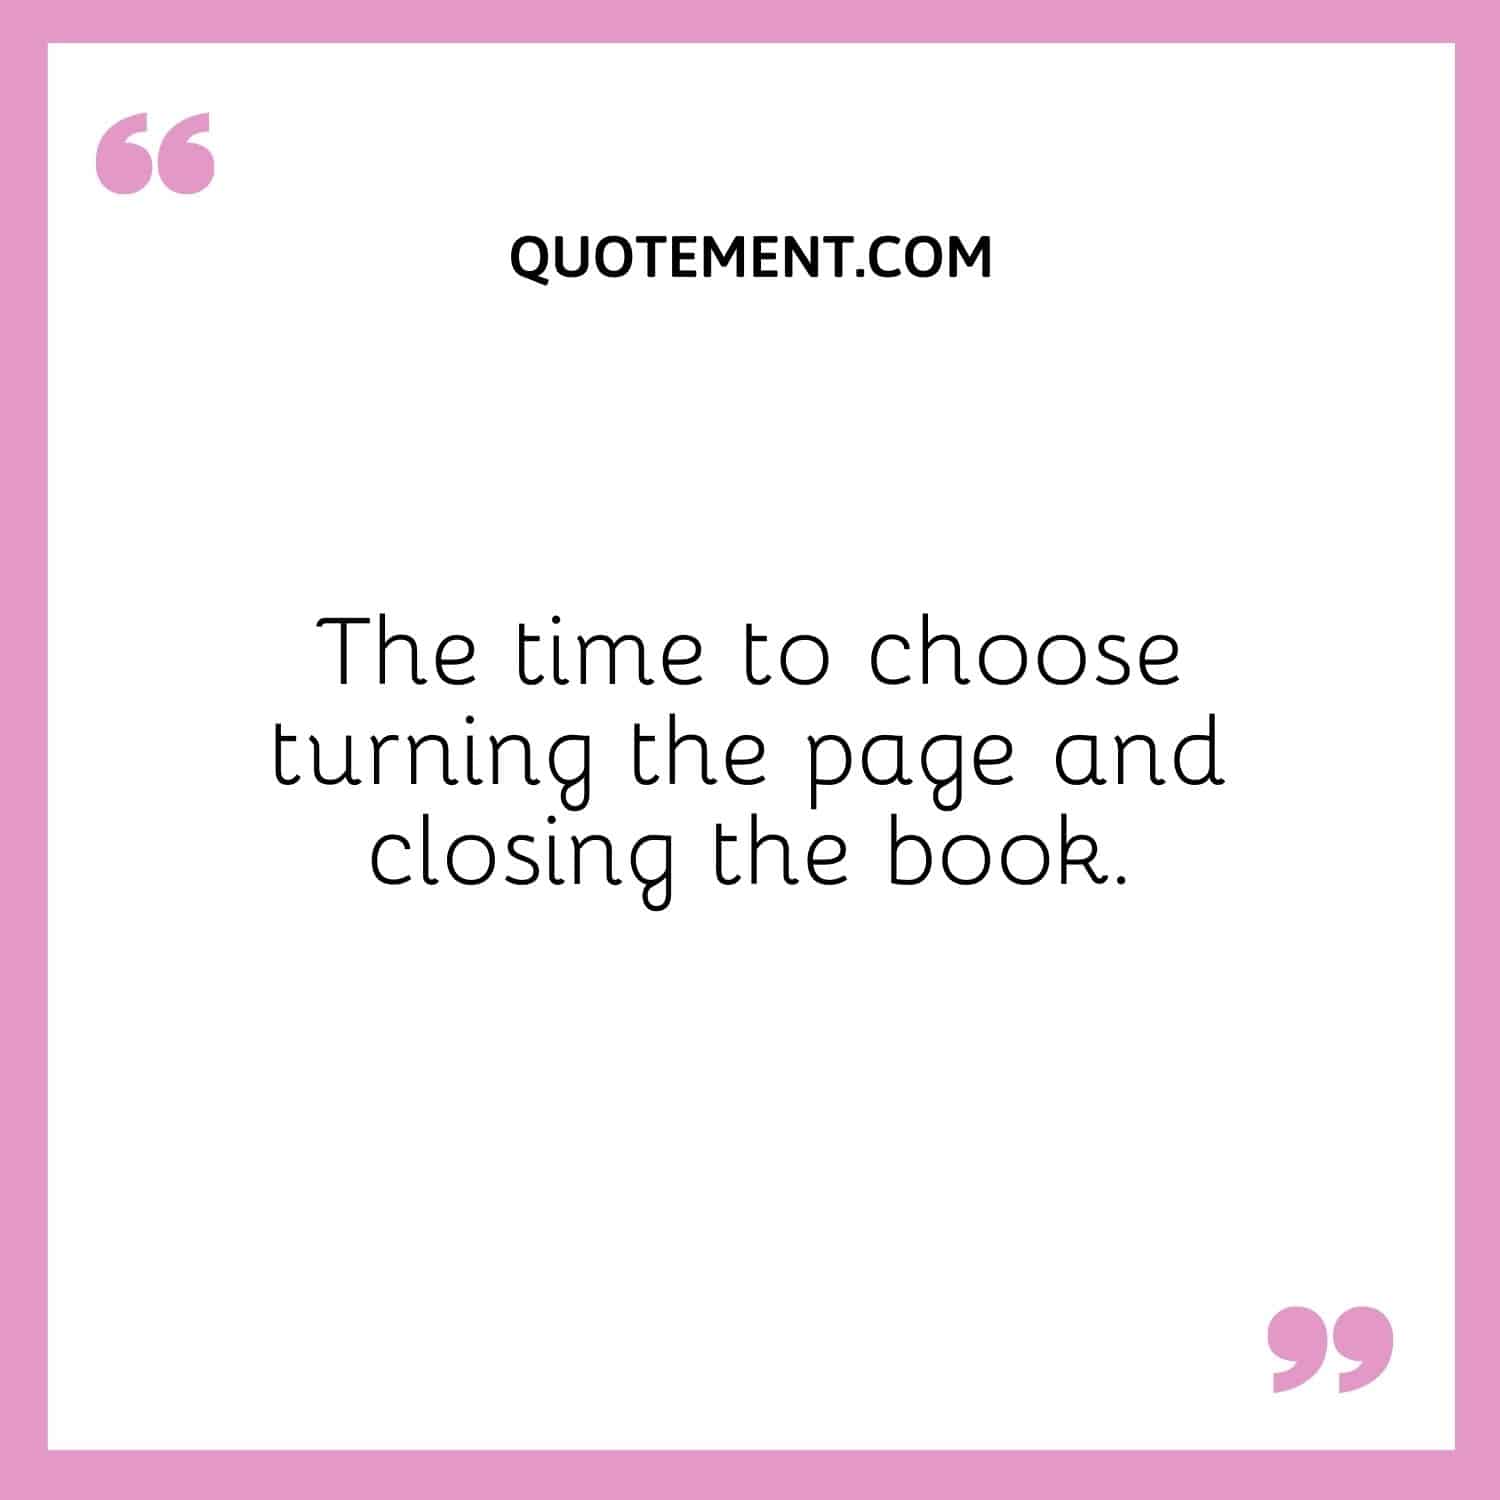 The time to choose turning the page and closing the book.